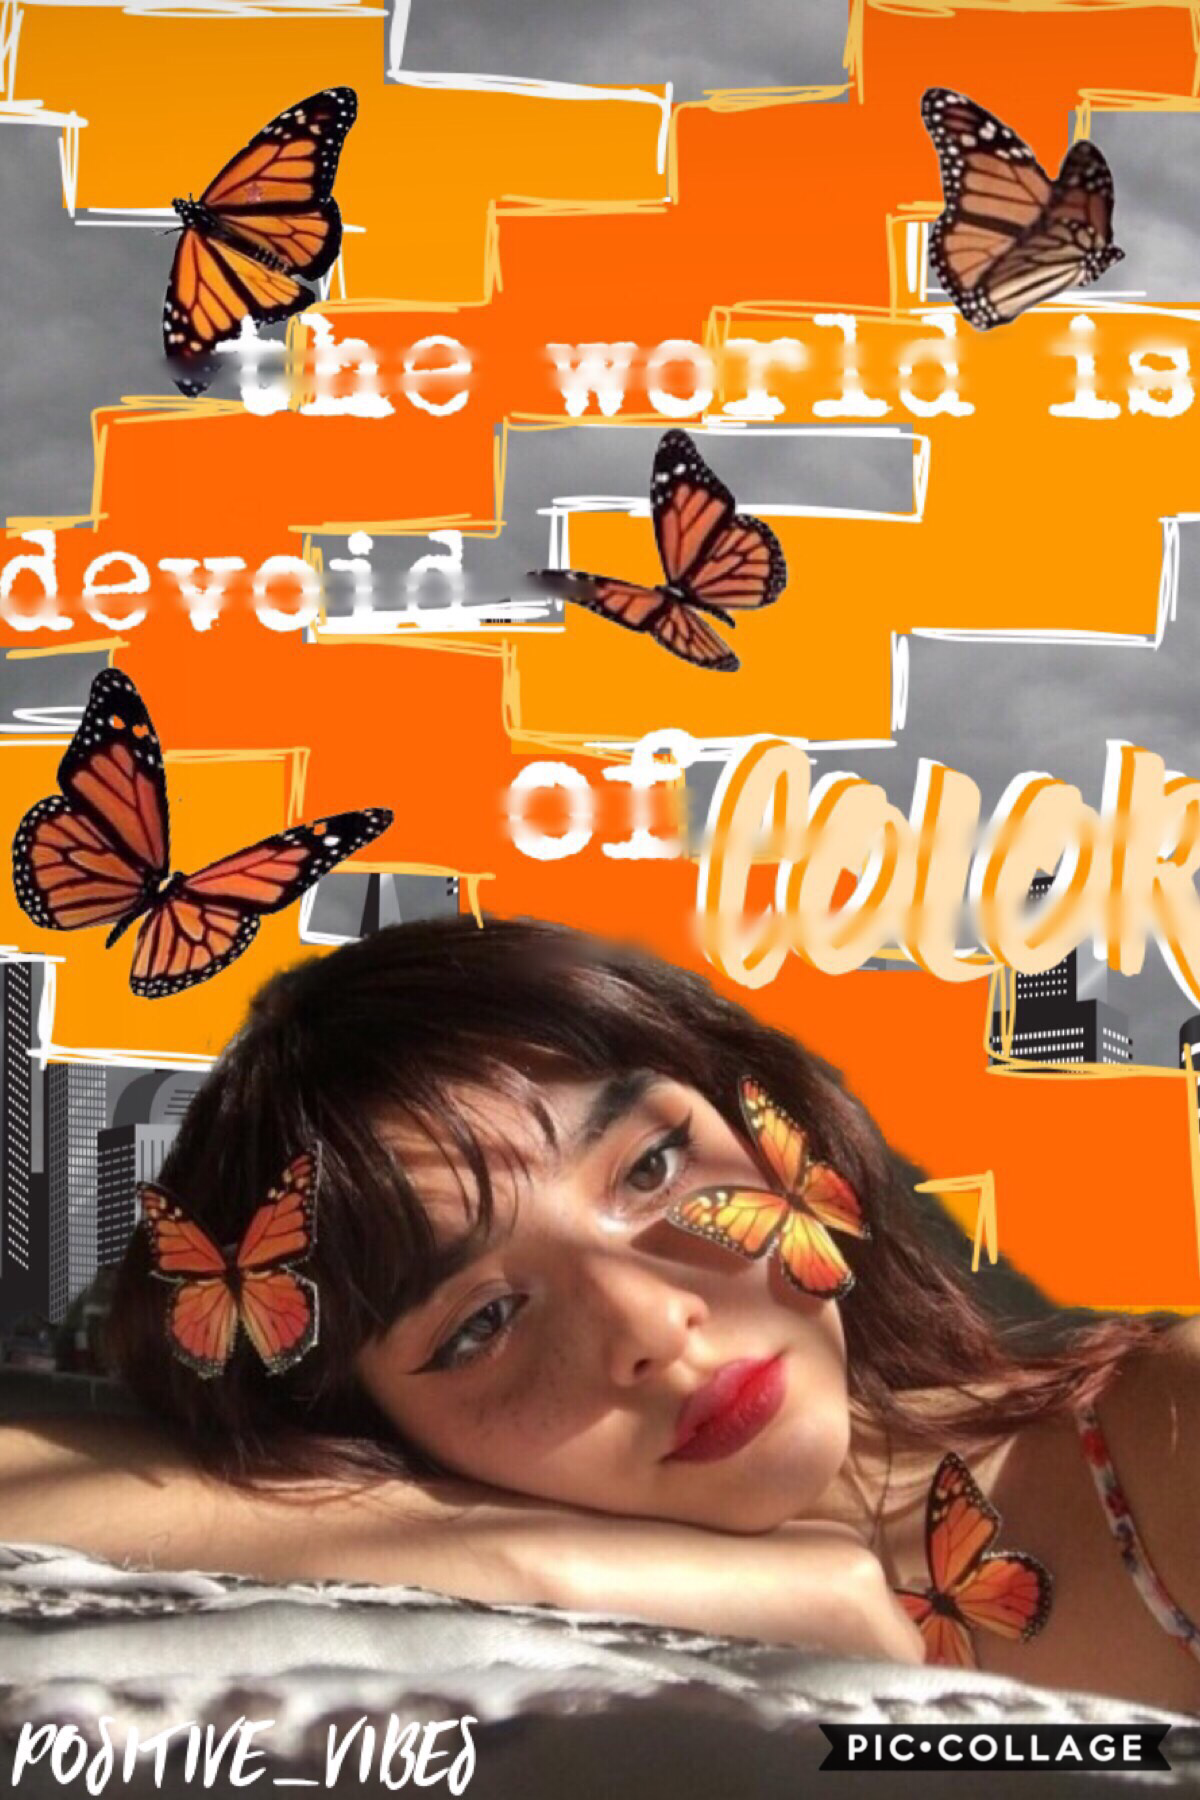 🍊hOLo tHeRe🍊IM SO INTO THE THRONE OF GLASS SERIES🍊as you can see, I’m trying to experiment with the fonts🍊No school tomorrow wHoOp🍊 I’m heading to the city tomorrow and I’m so excited🍊
#PCONLY
#NEWFONTS
#ORANGES
#BUTTERFLYS
#NOSCHOOL
#CITY
#THRONE
#OFGLAS